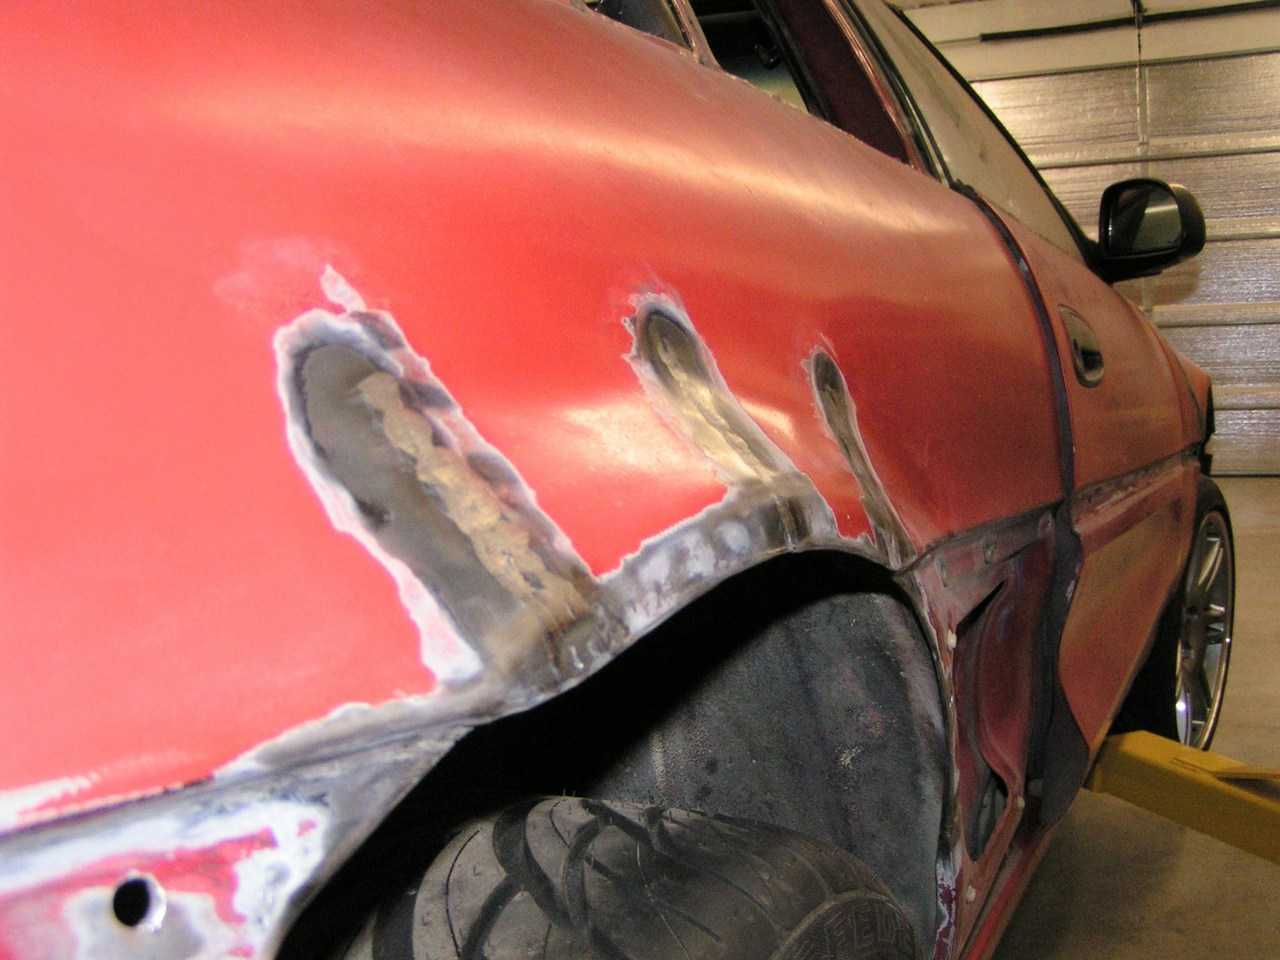 MR2 stock rear fenders, cut, pulled and welded